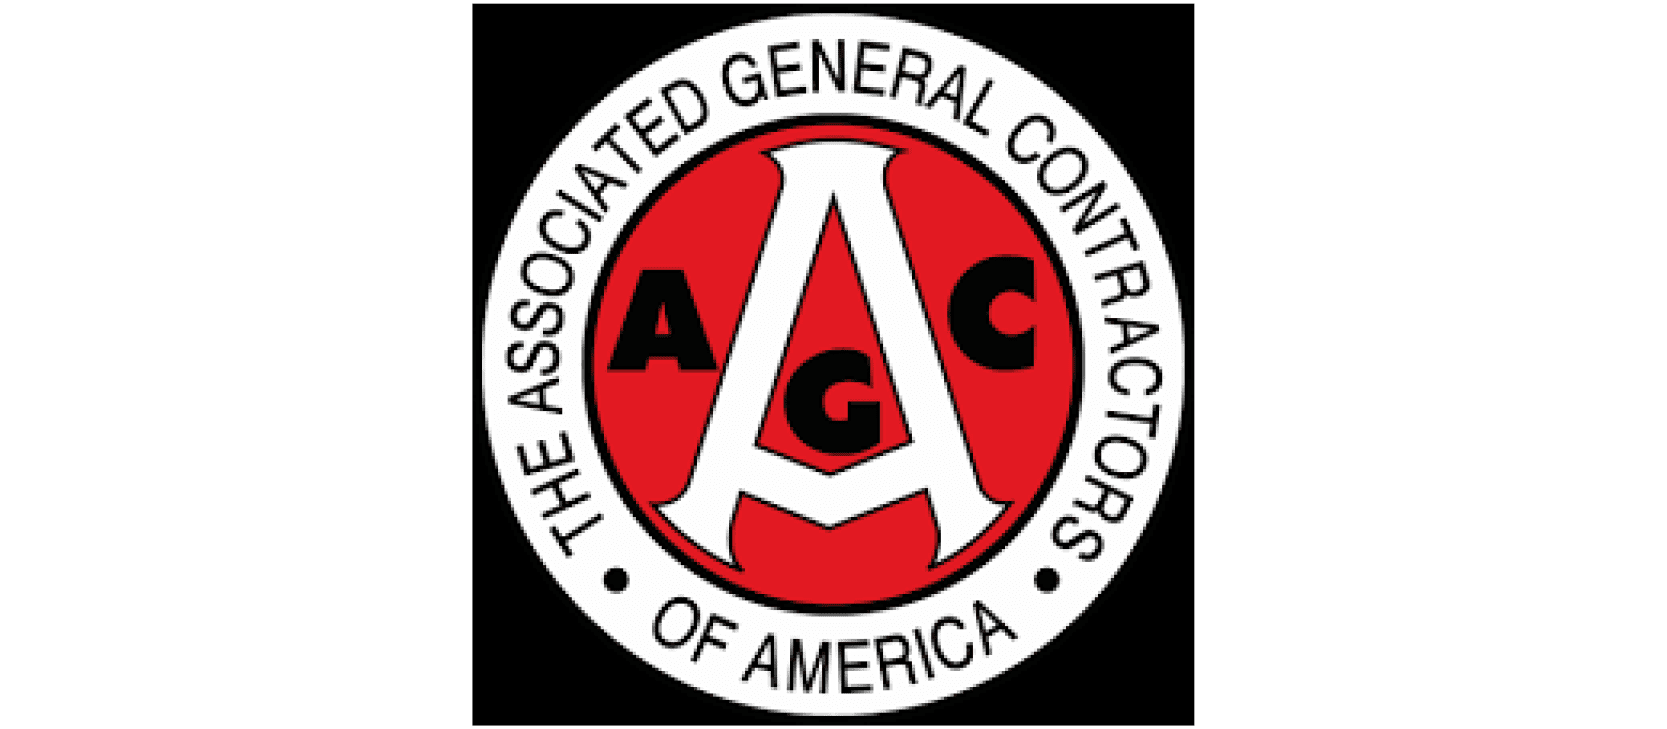 Cypress Employment Associated General Contractors of America Affiliate